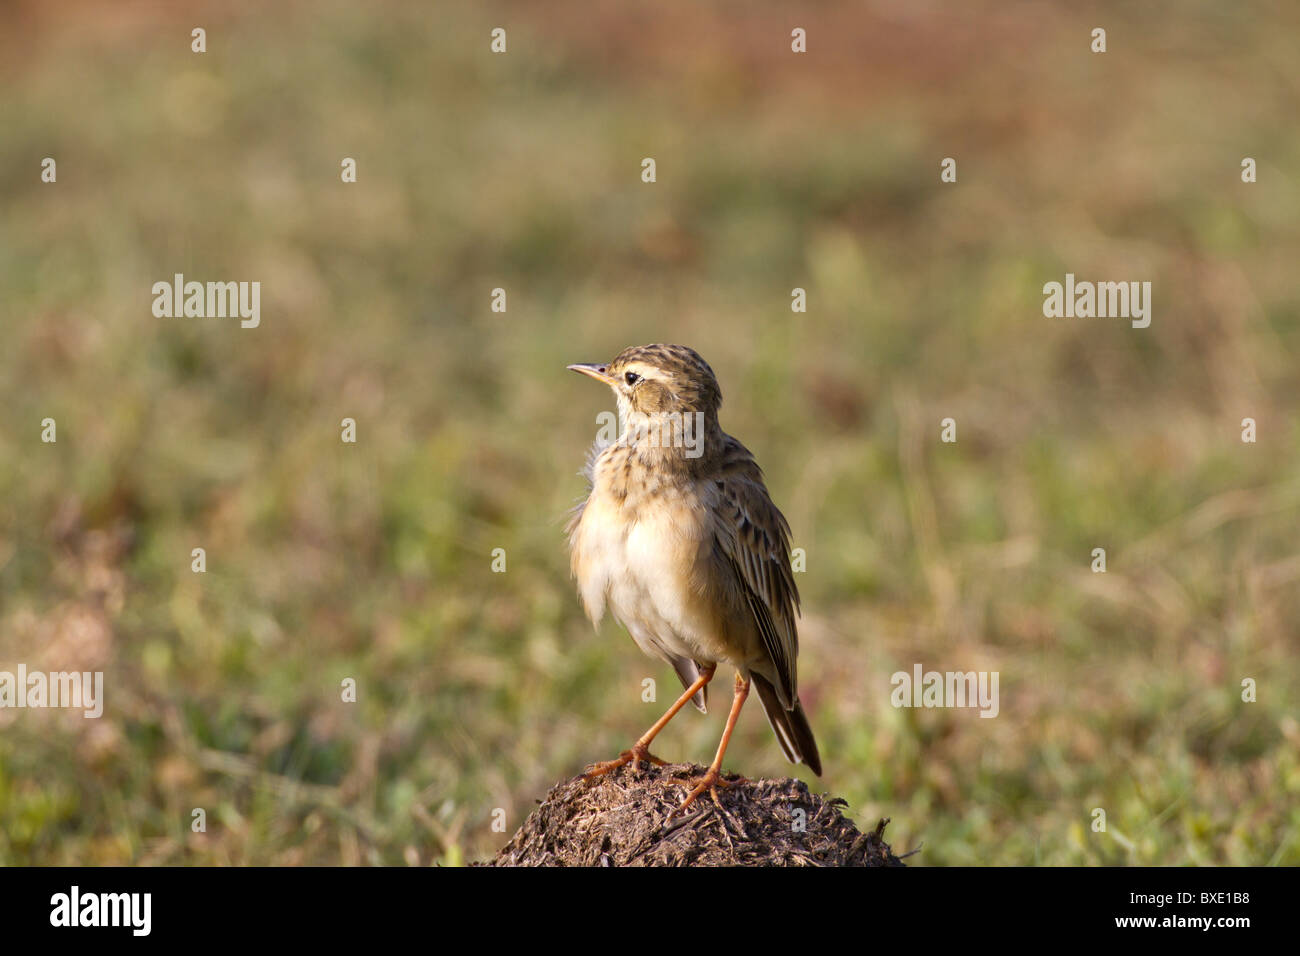 Paddyfield Pipit (Anthus rufulus), is a small passerine bird found in Southern Asia, this one seen at Yala NP, Sri Lanka. Stock Photo